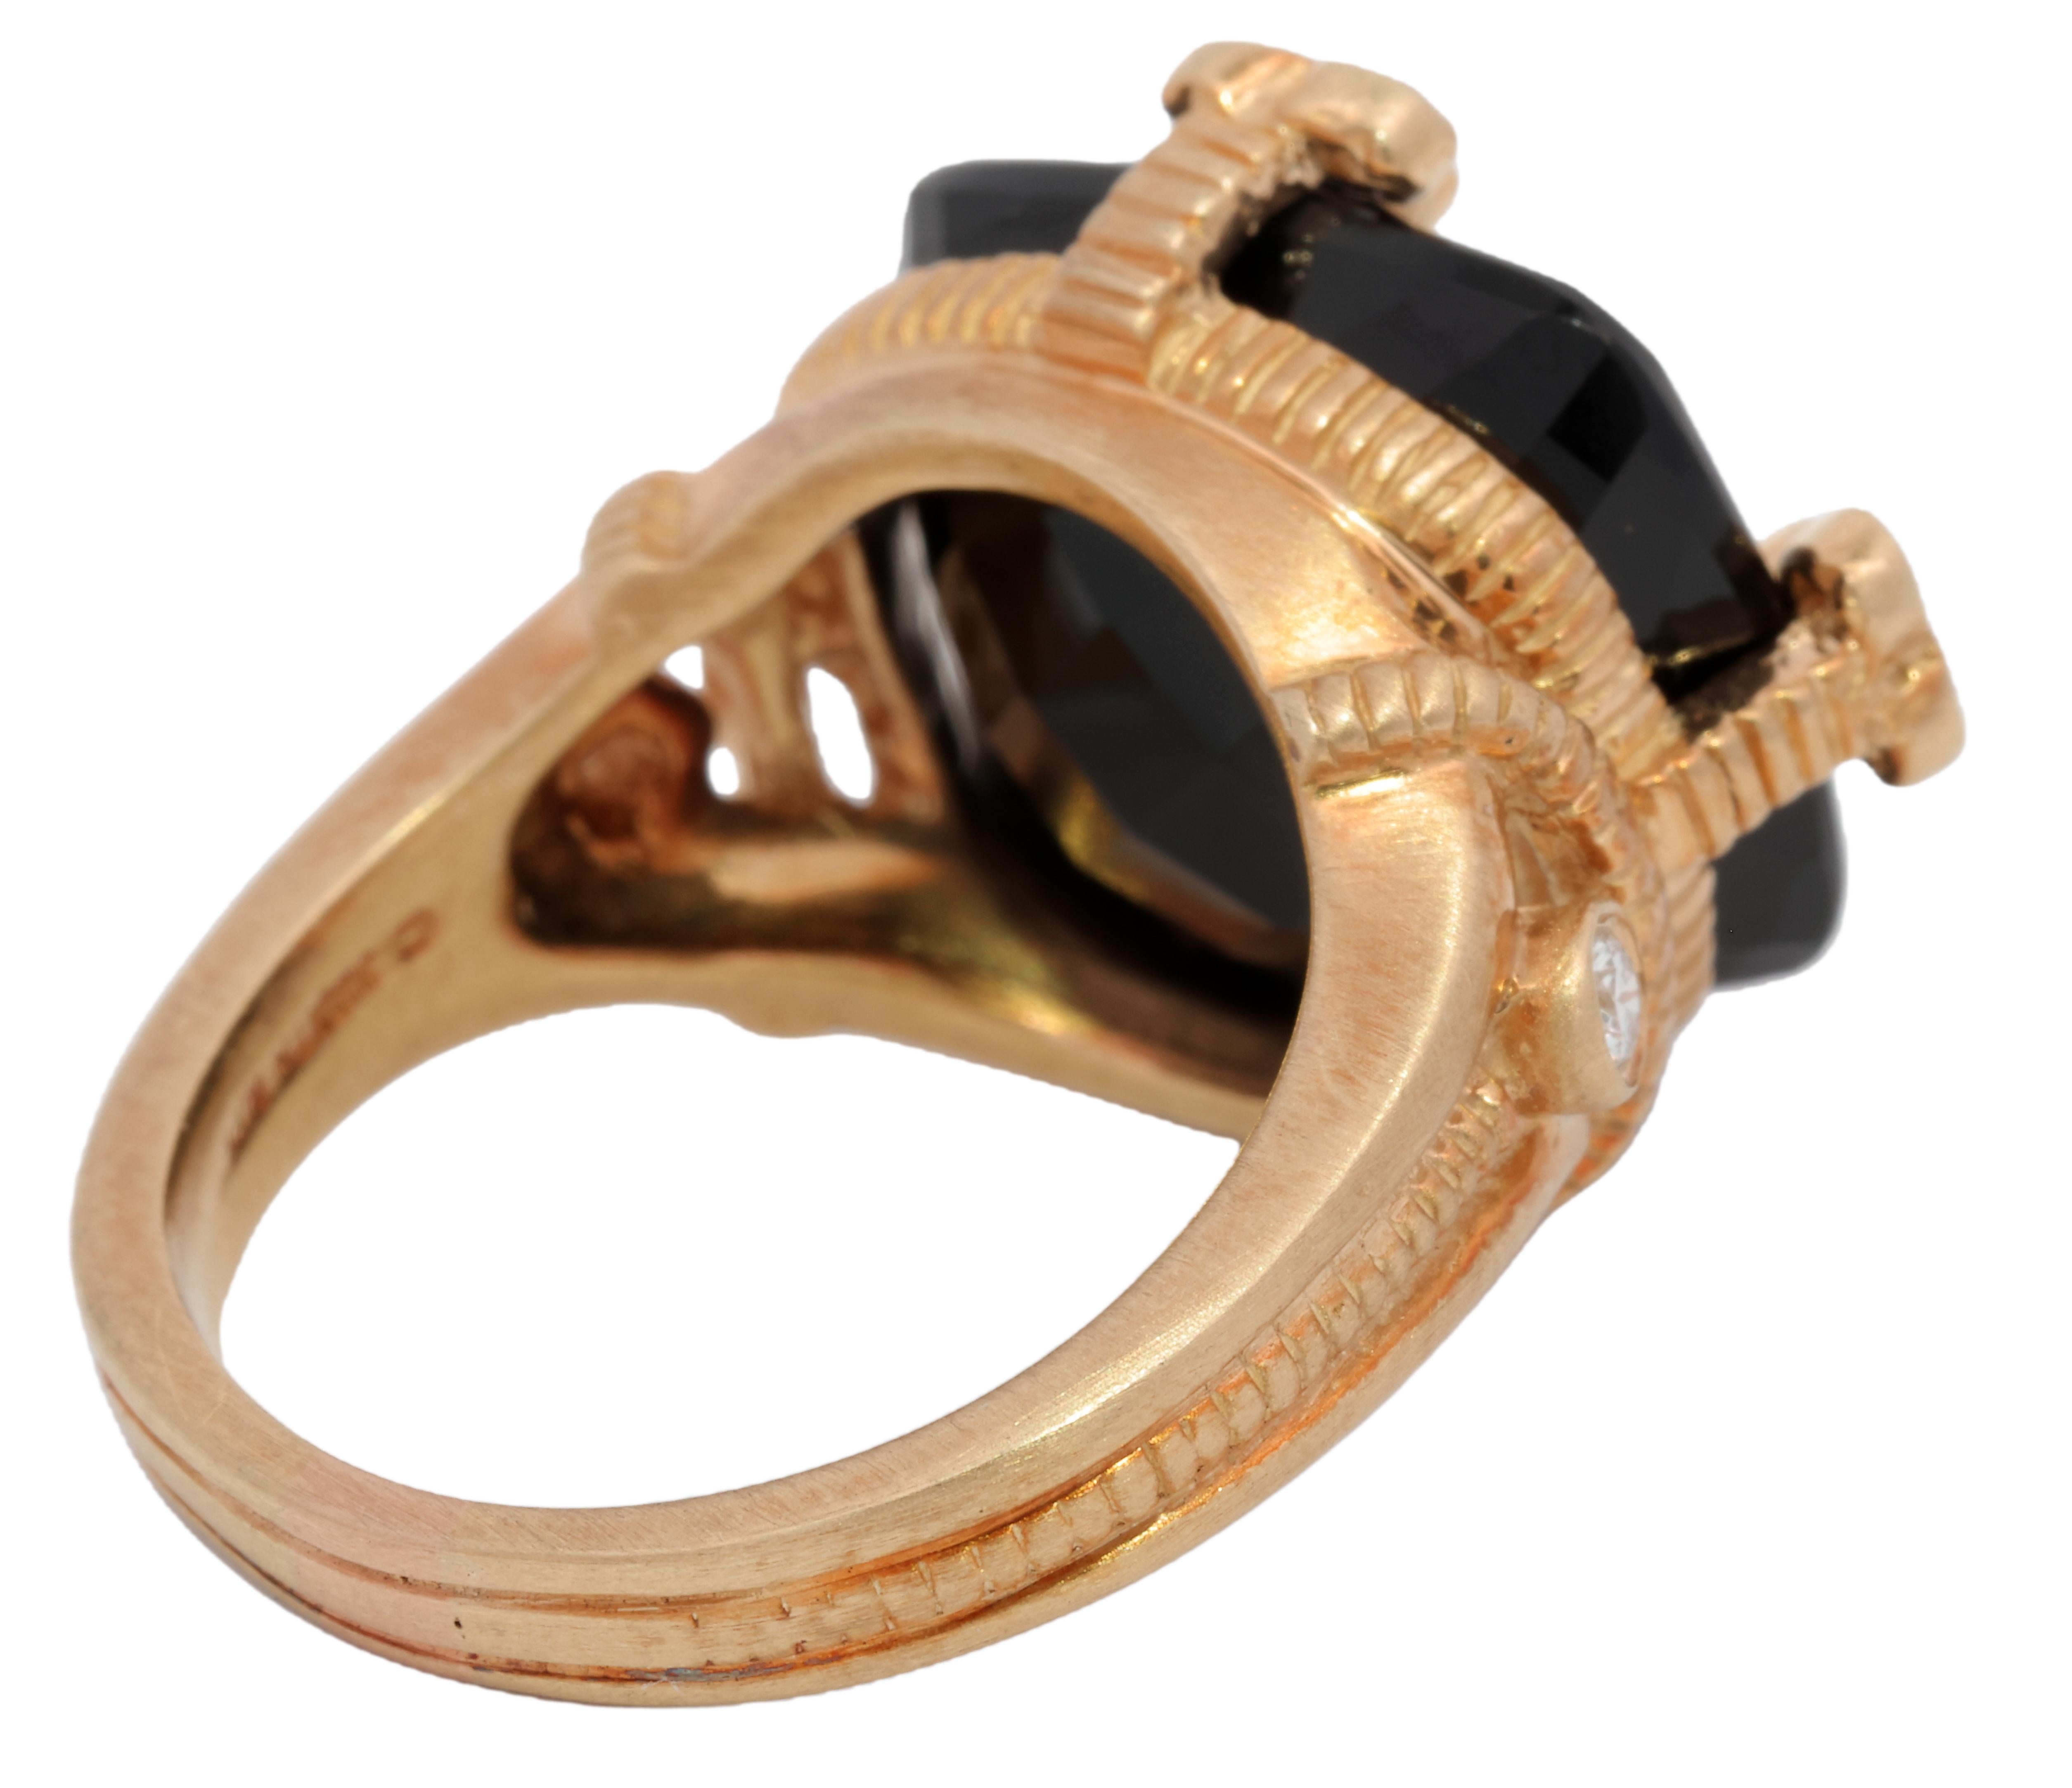 Contemporary Judith Ripka Cushion Cut Black Onyx and Diamond Cocktail Ring in 18K Yellow Gold For Sale